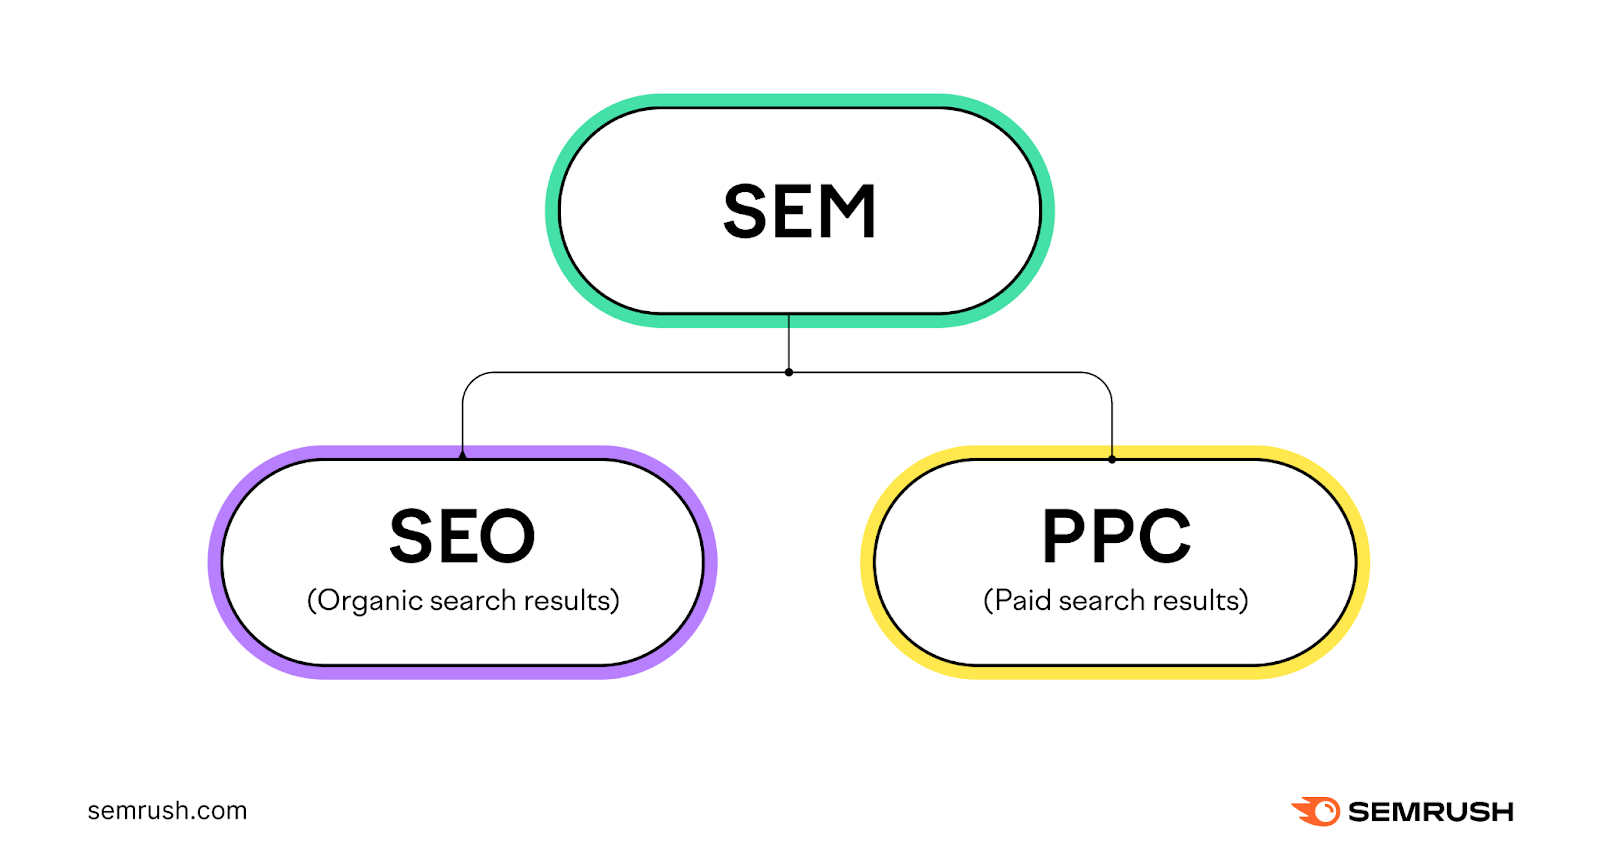 SEM includes SEO and PPC